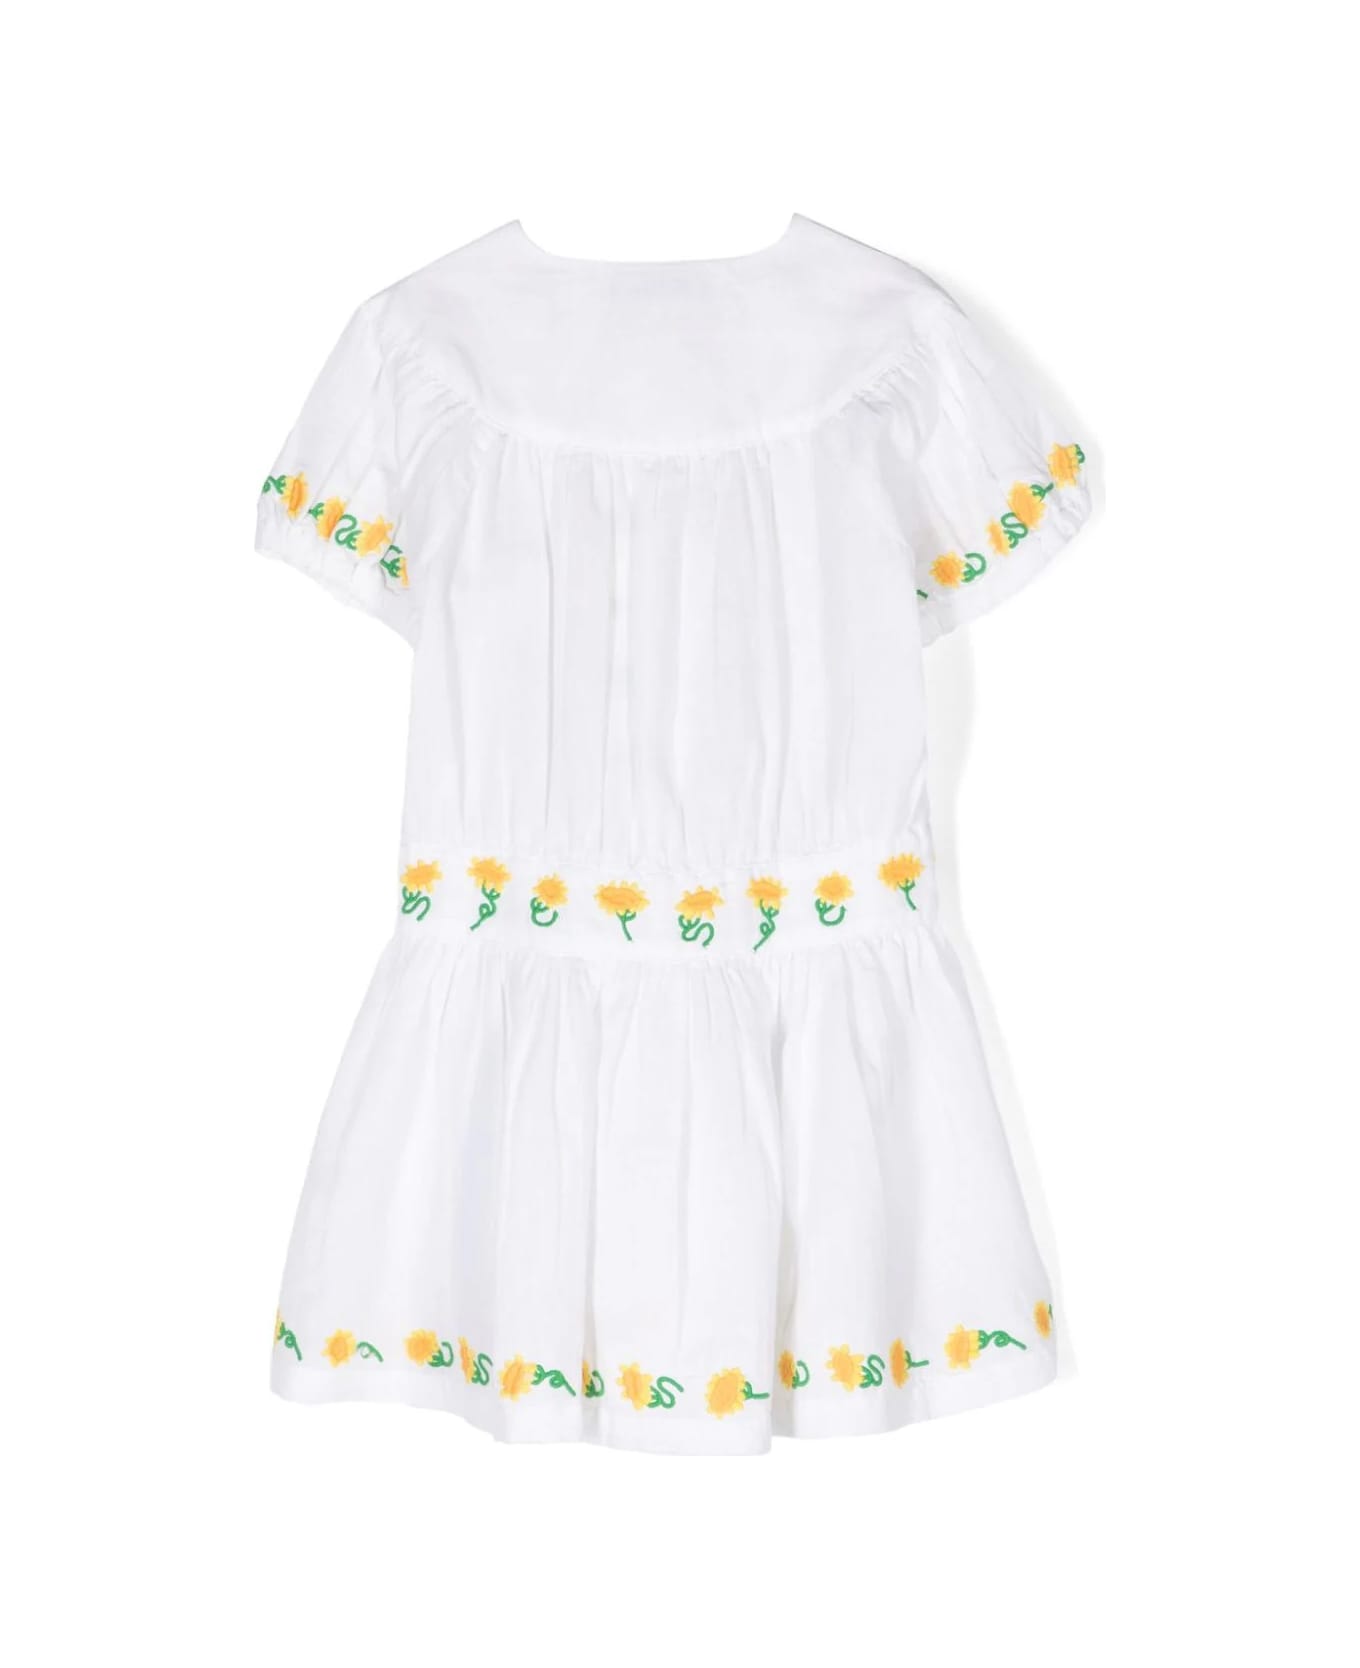 Stella McCartney Kids White Dress With Embroidered Sunflowers - White